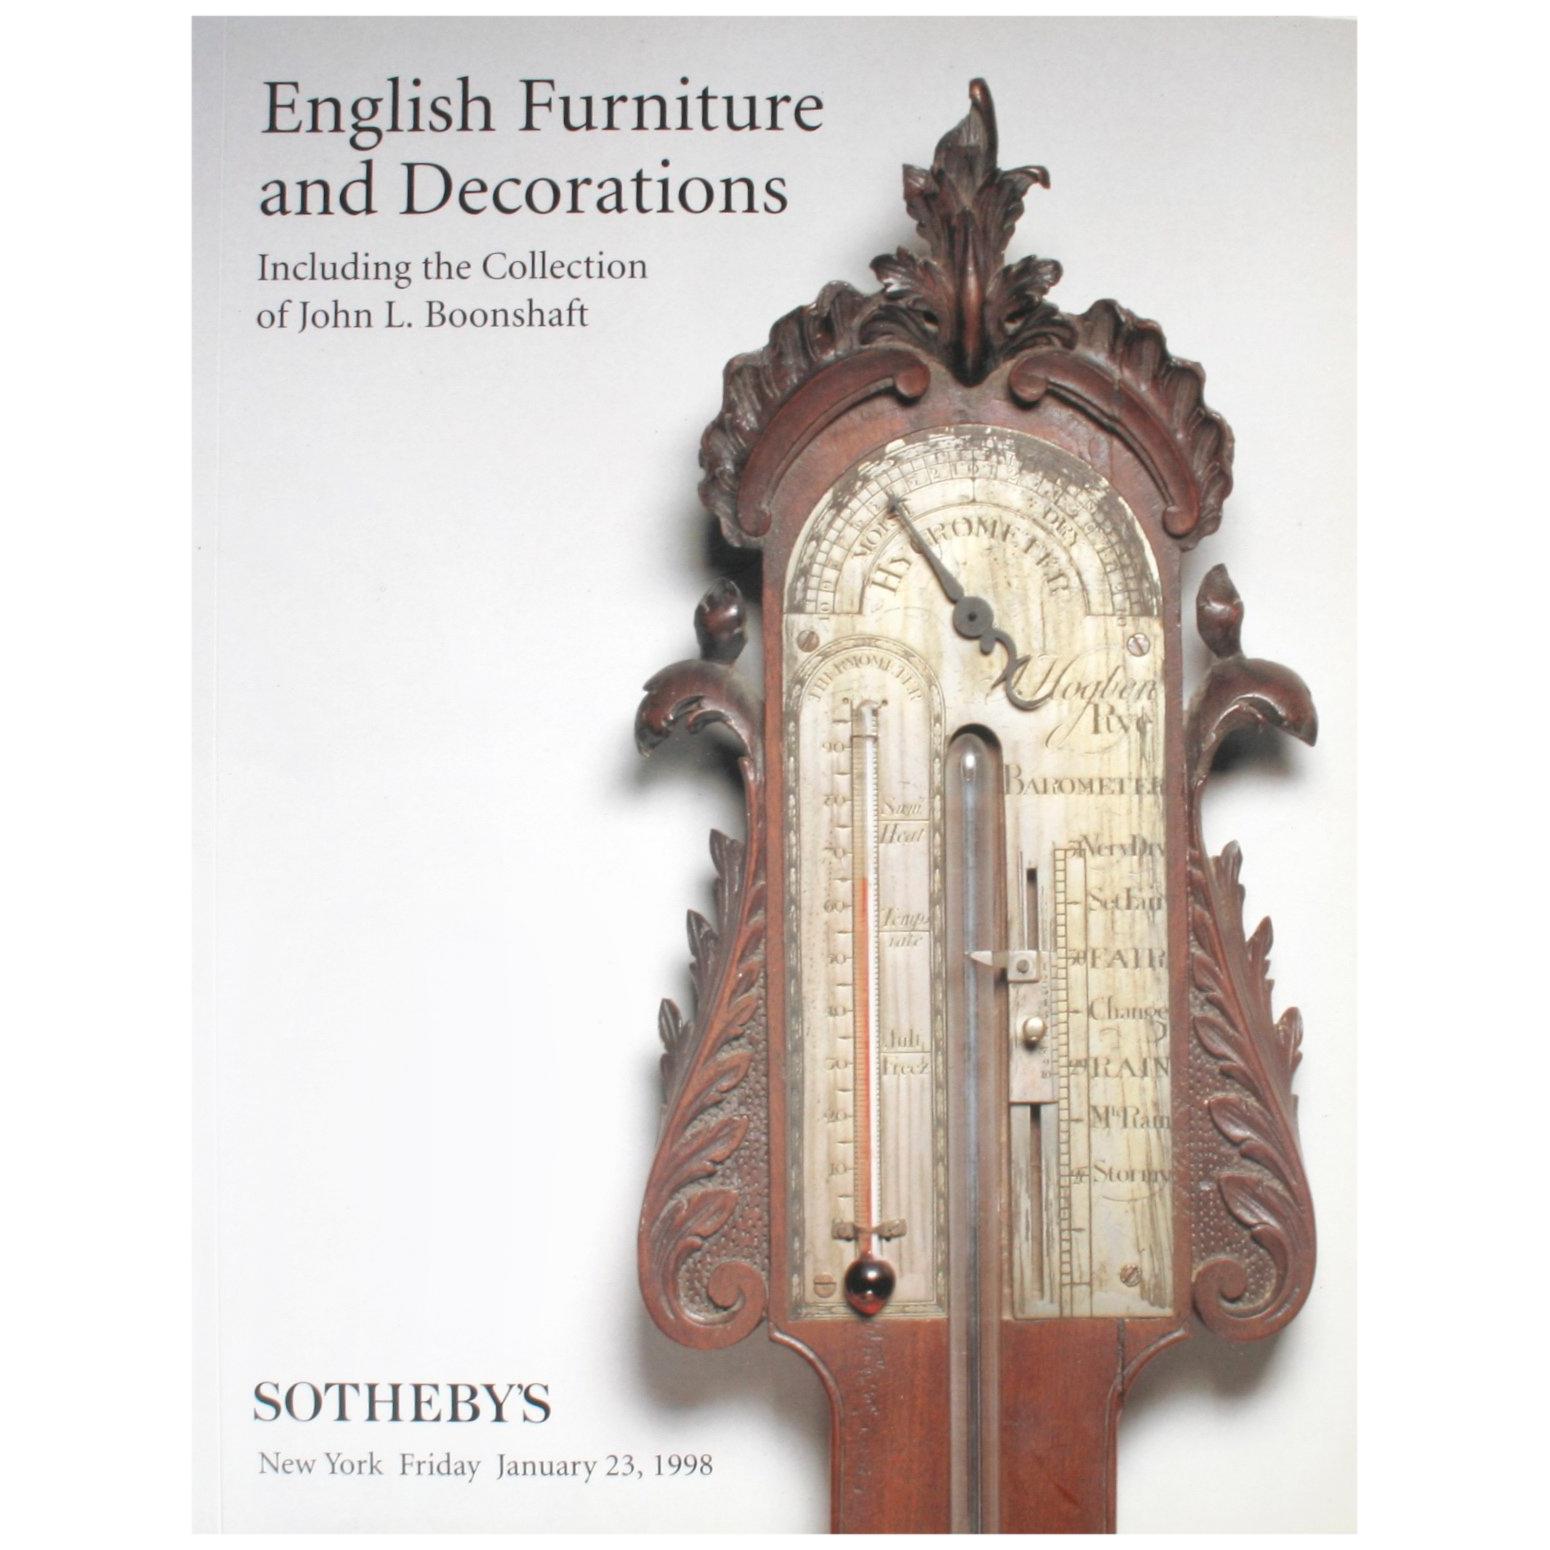 Sotheby's: English Furniture & Decorations, John L. Boonshaft Collection, 1998